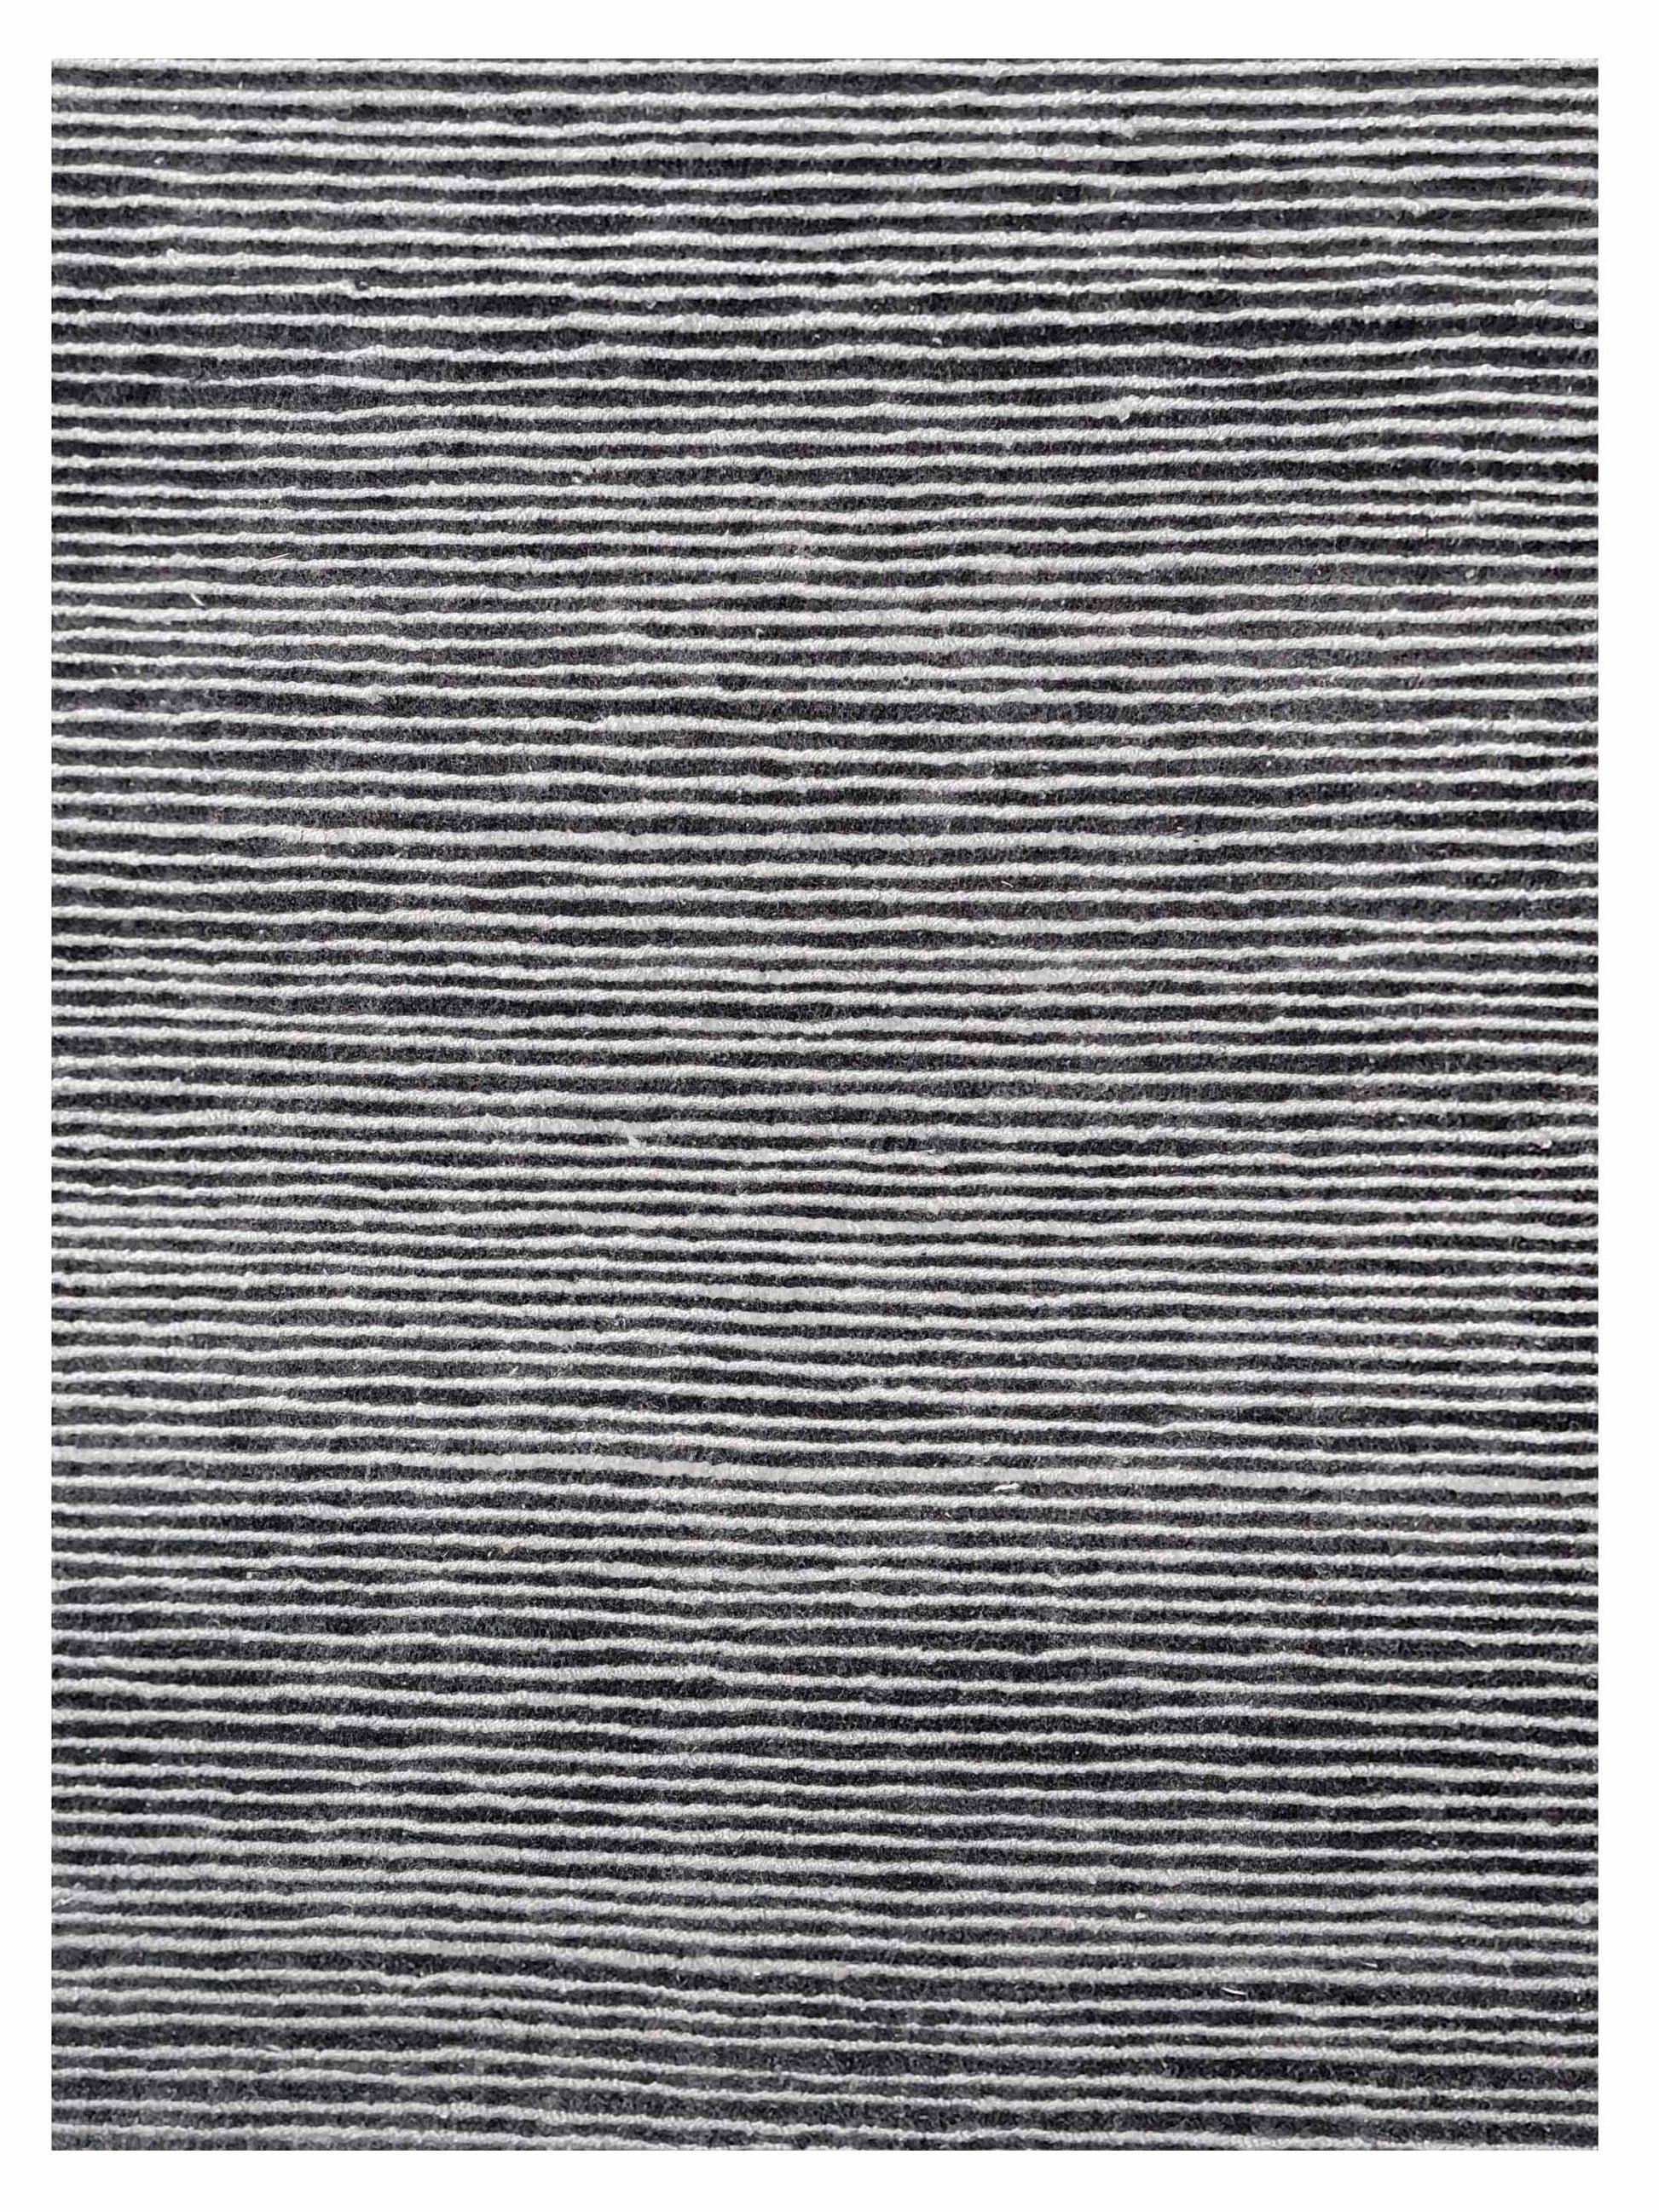 Artisan Mary PT-201 Grey Contemporary Knotted Rug